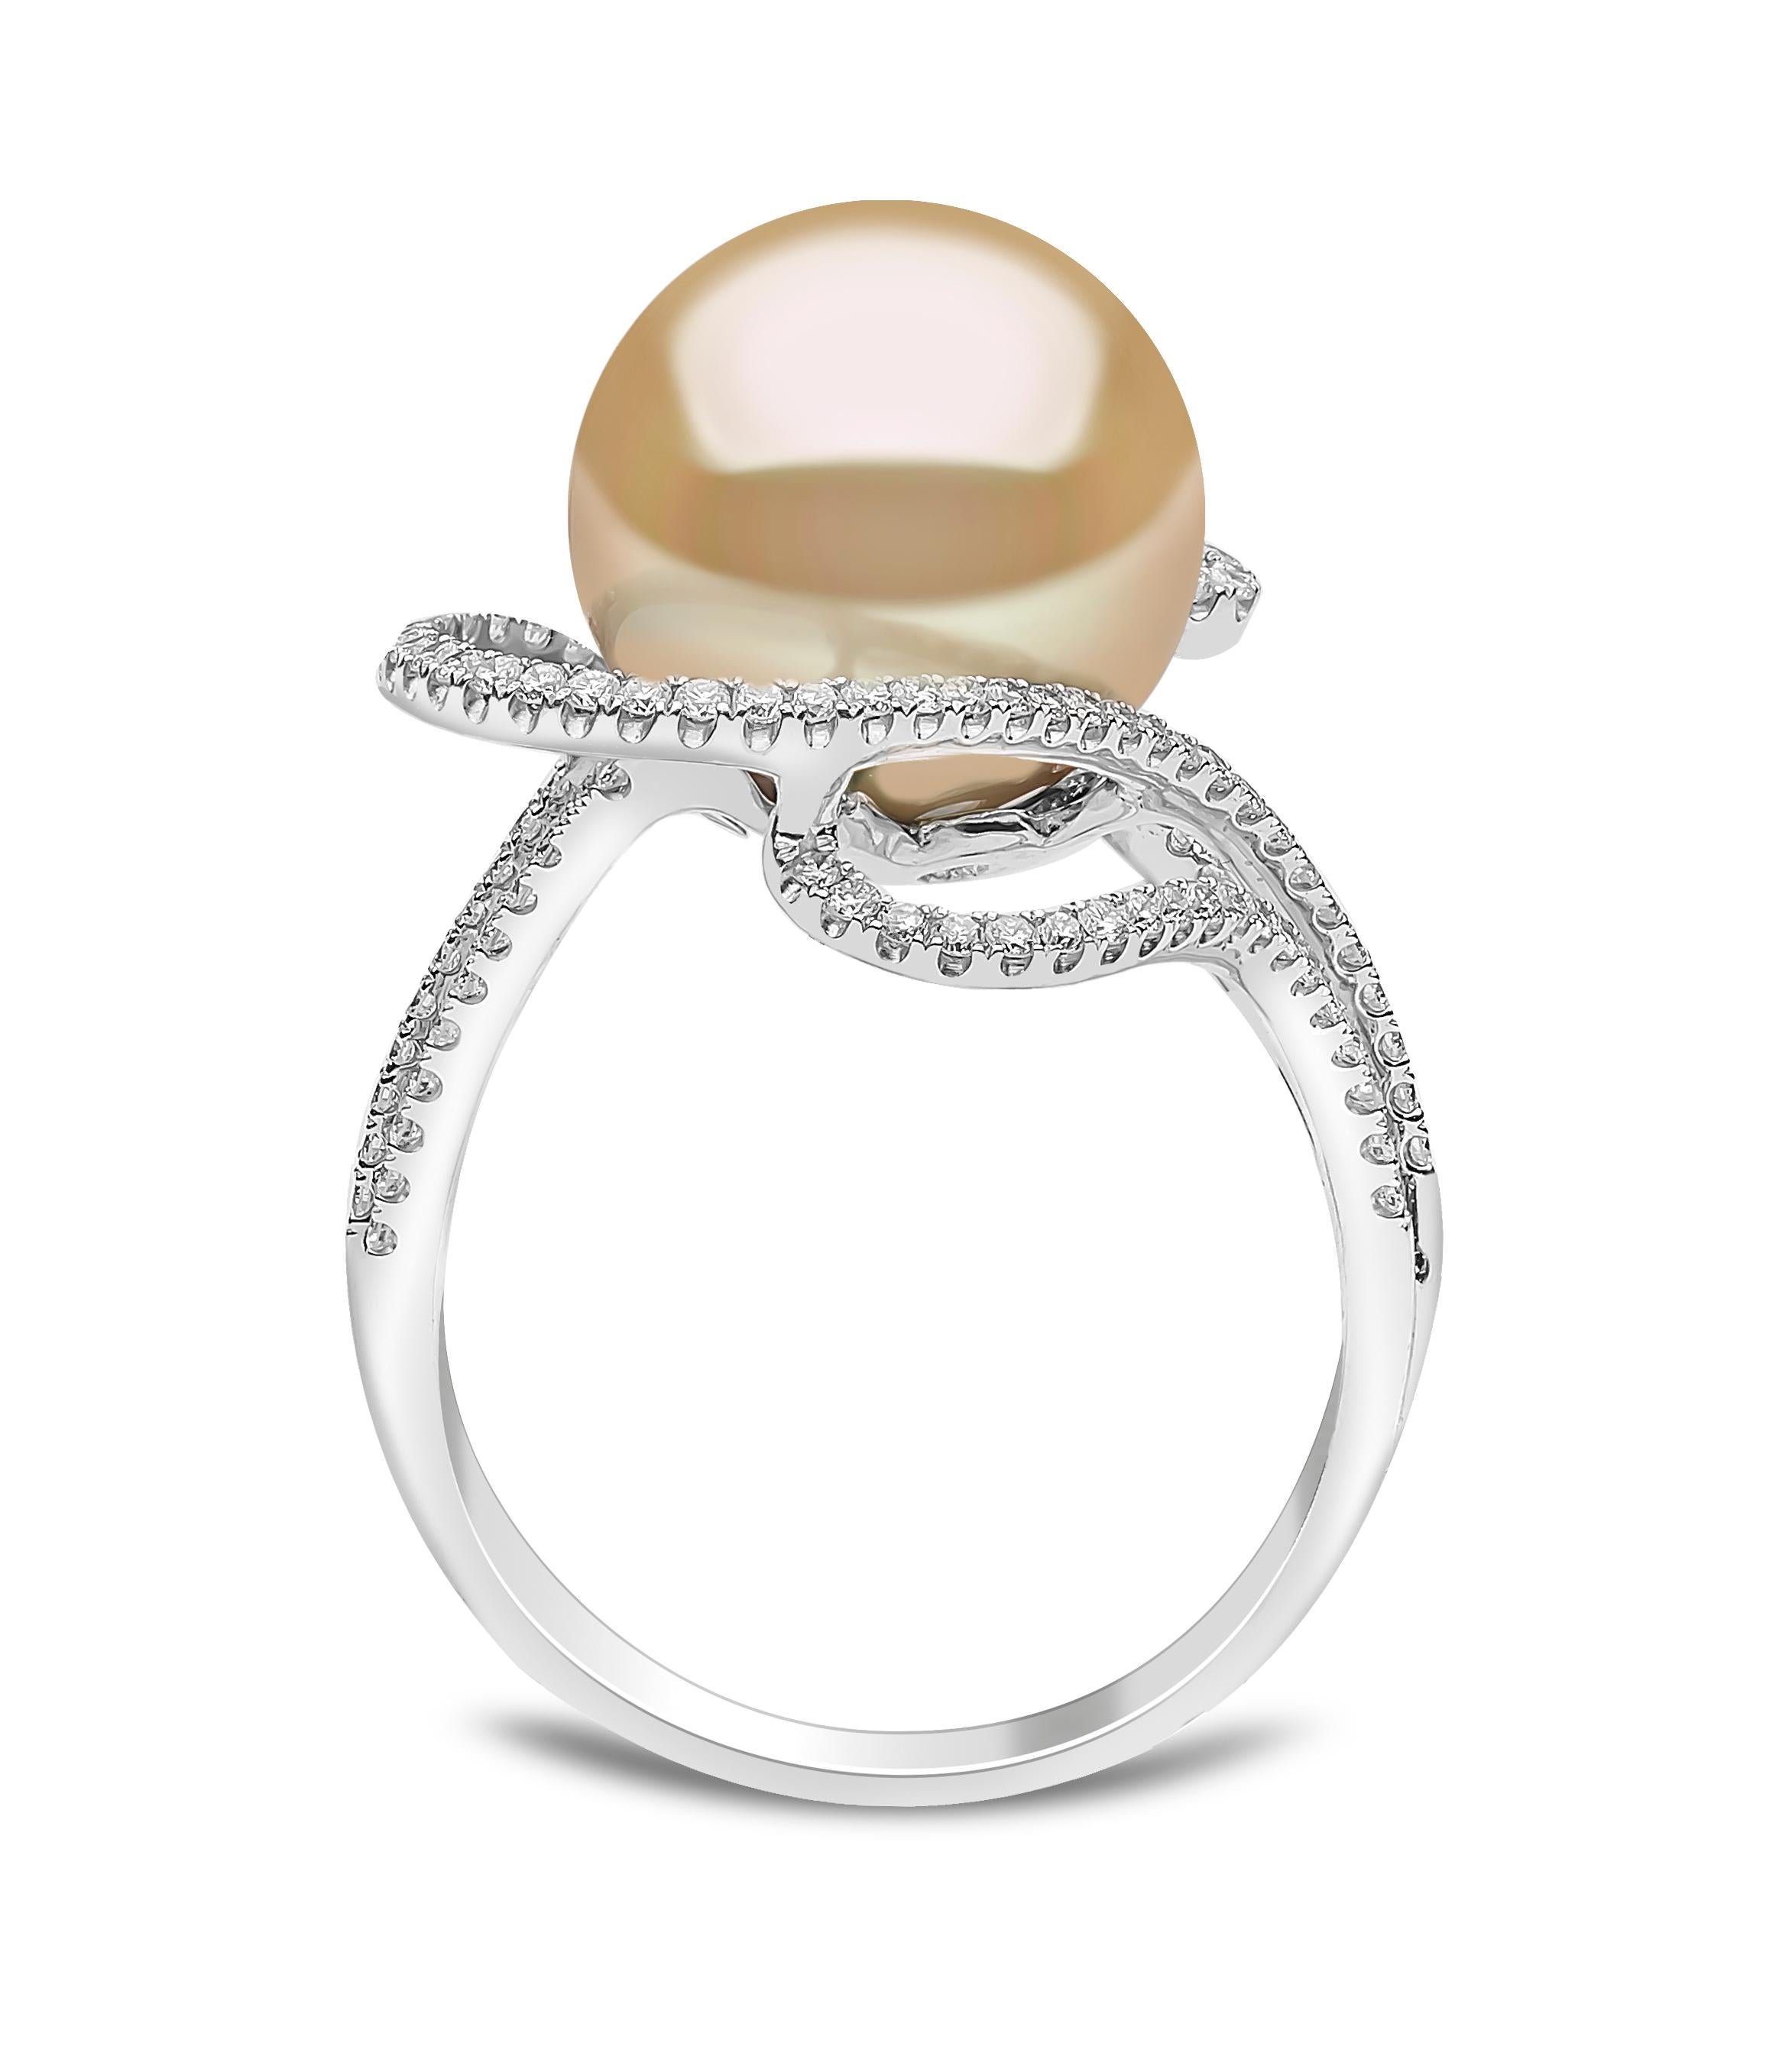 This scintillating ring by Yoko London features a soft Golden South Sea pearl set amongst contemporary diamond swirls. The rarest of all pearl varieties, the golden South Sea pearl featured at the centre of this ring is the perfect way to add a